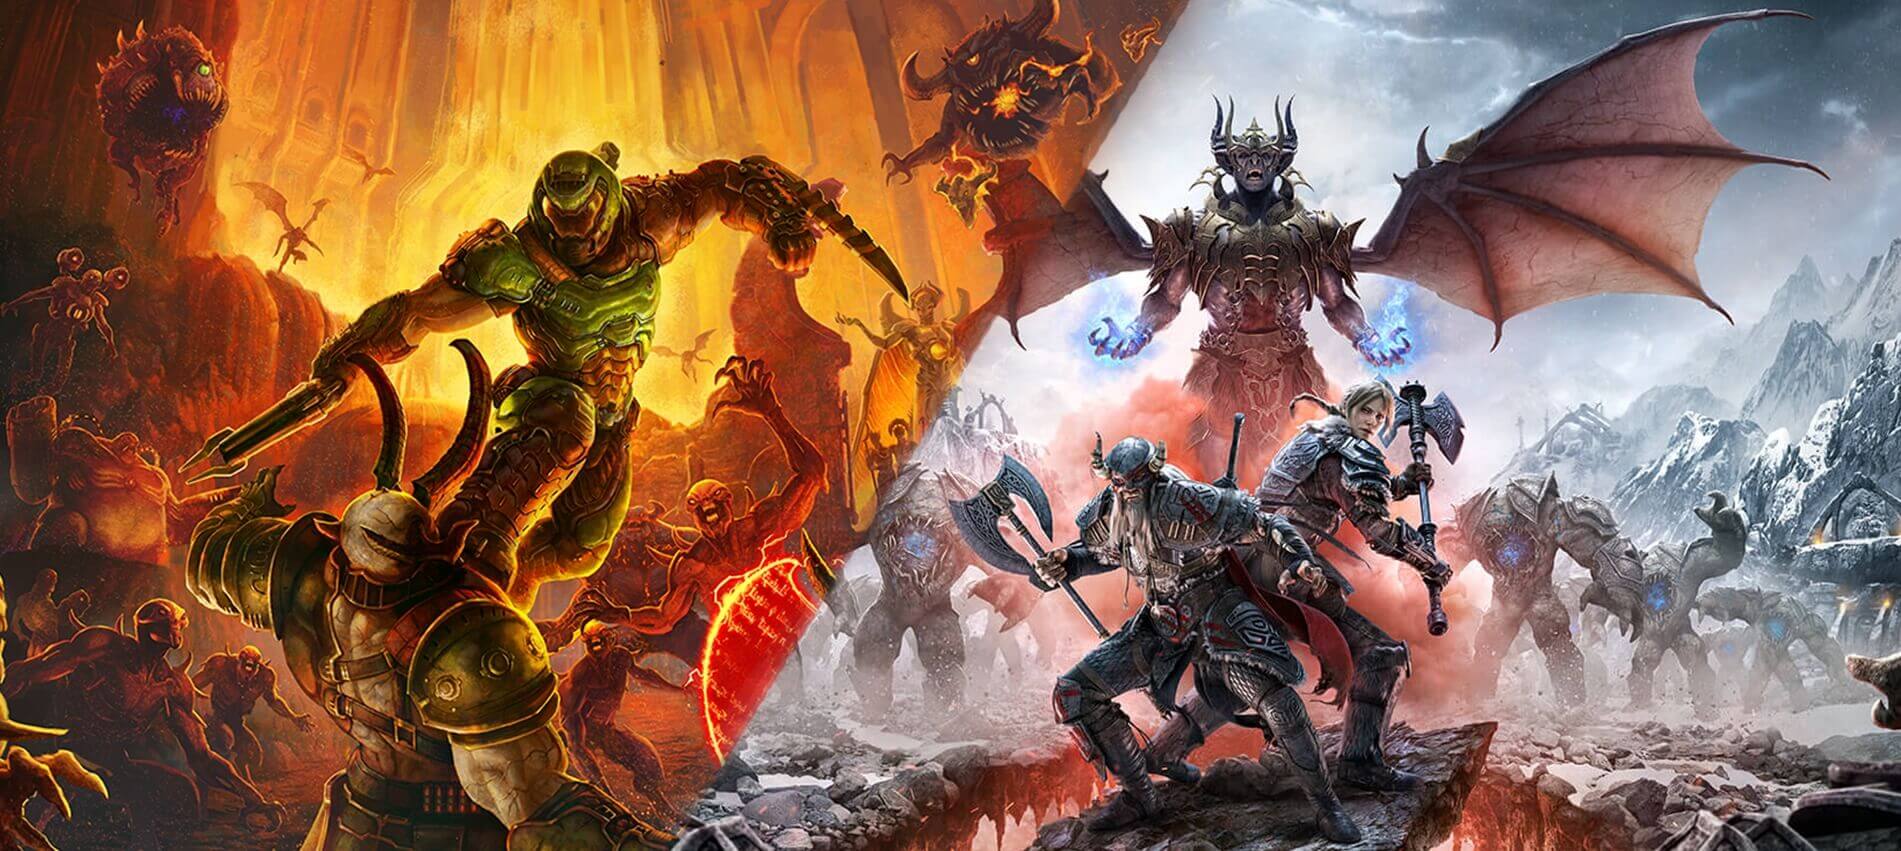 Doom Eternal and The Elder Scrolls Online are coming to next-gen consoles, with free upgrades